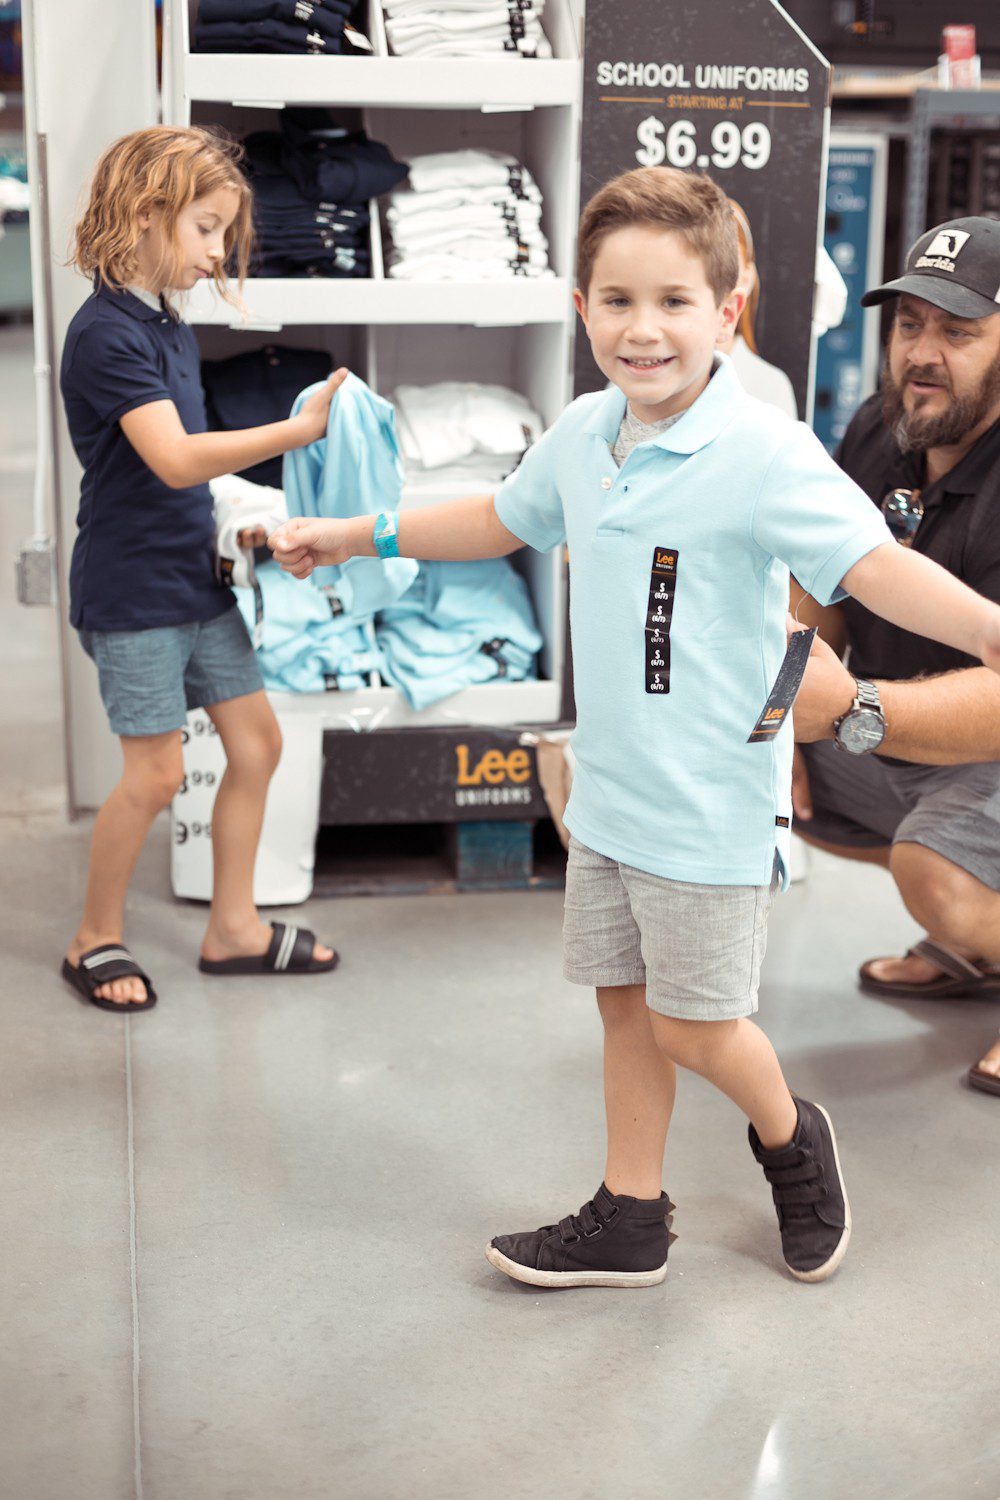 5 Sensational Strategies to Make Getting Ready for School Easy | How to Get Ready for School: 5 Sensational Strategies to Make Easy on your Family by popular Tampa life and style blog, Fresh Mommy: image of a dad helping his two young sons try on a blue Lee polo shirt.